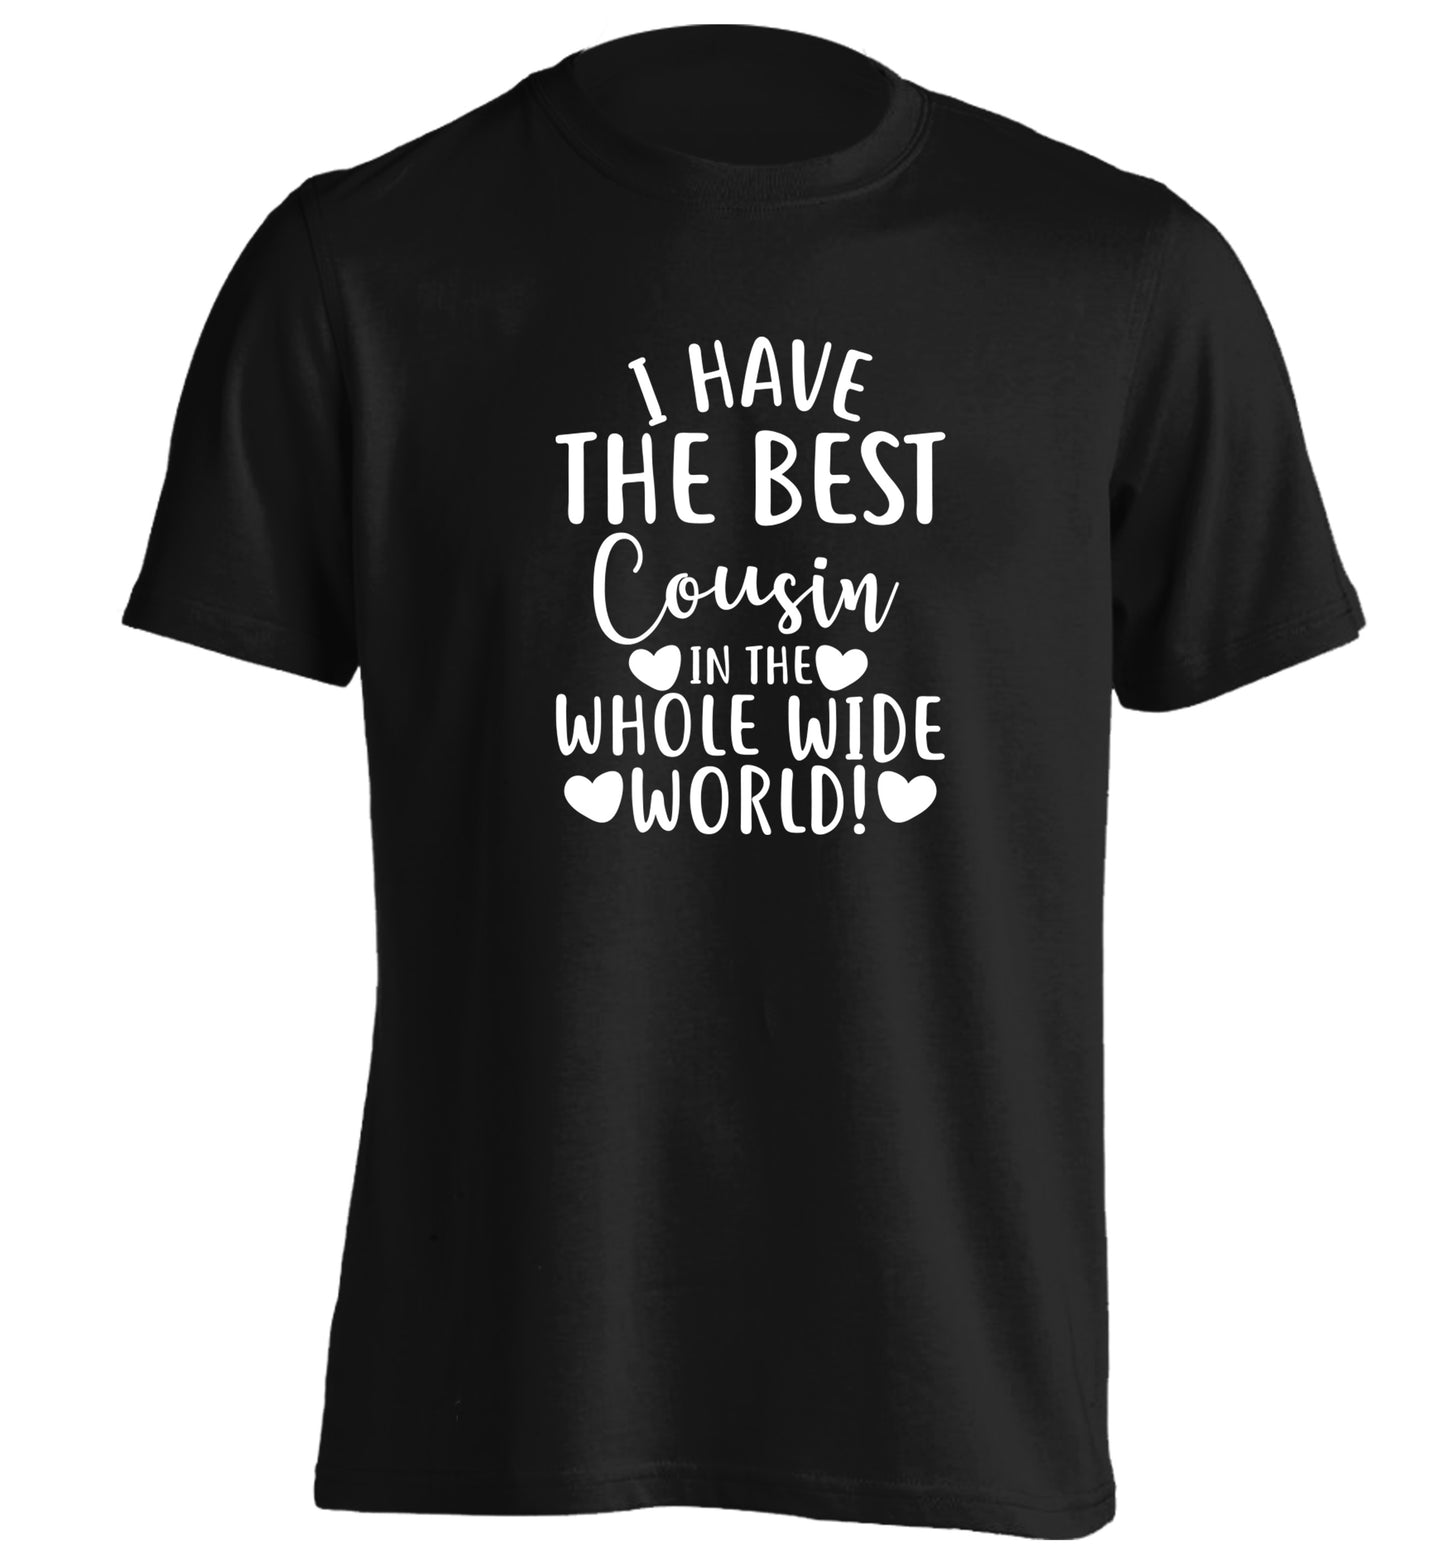 I have the best cousin in the whole wide world! adults unisex black Tshirt 2XL